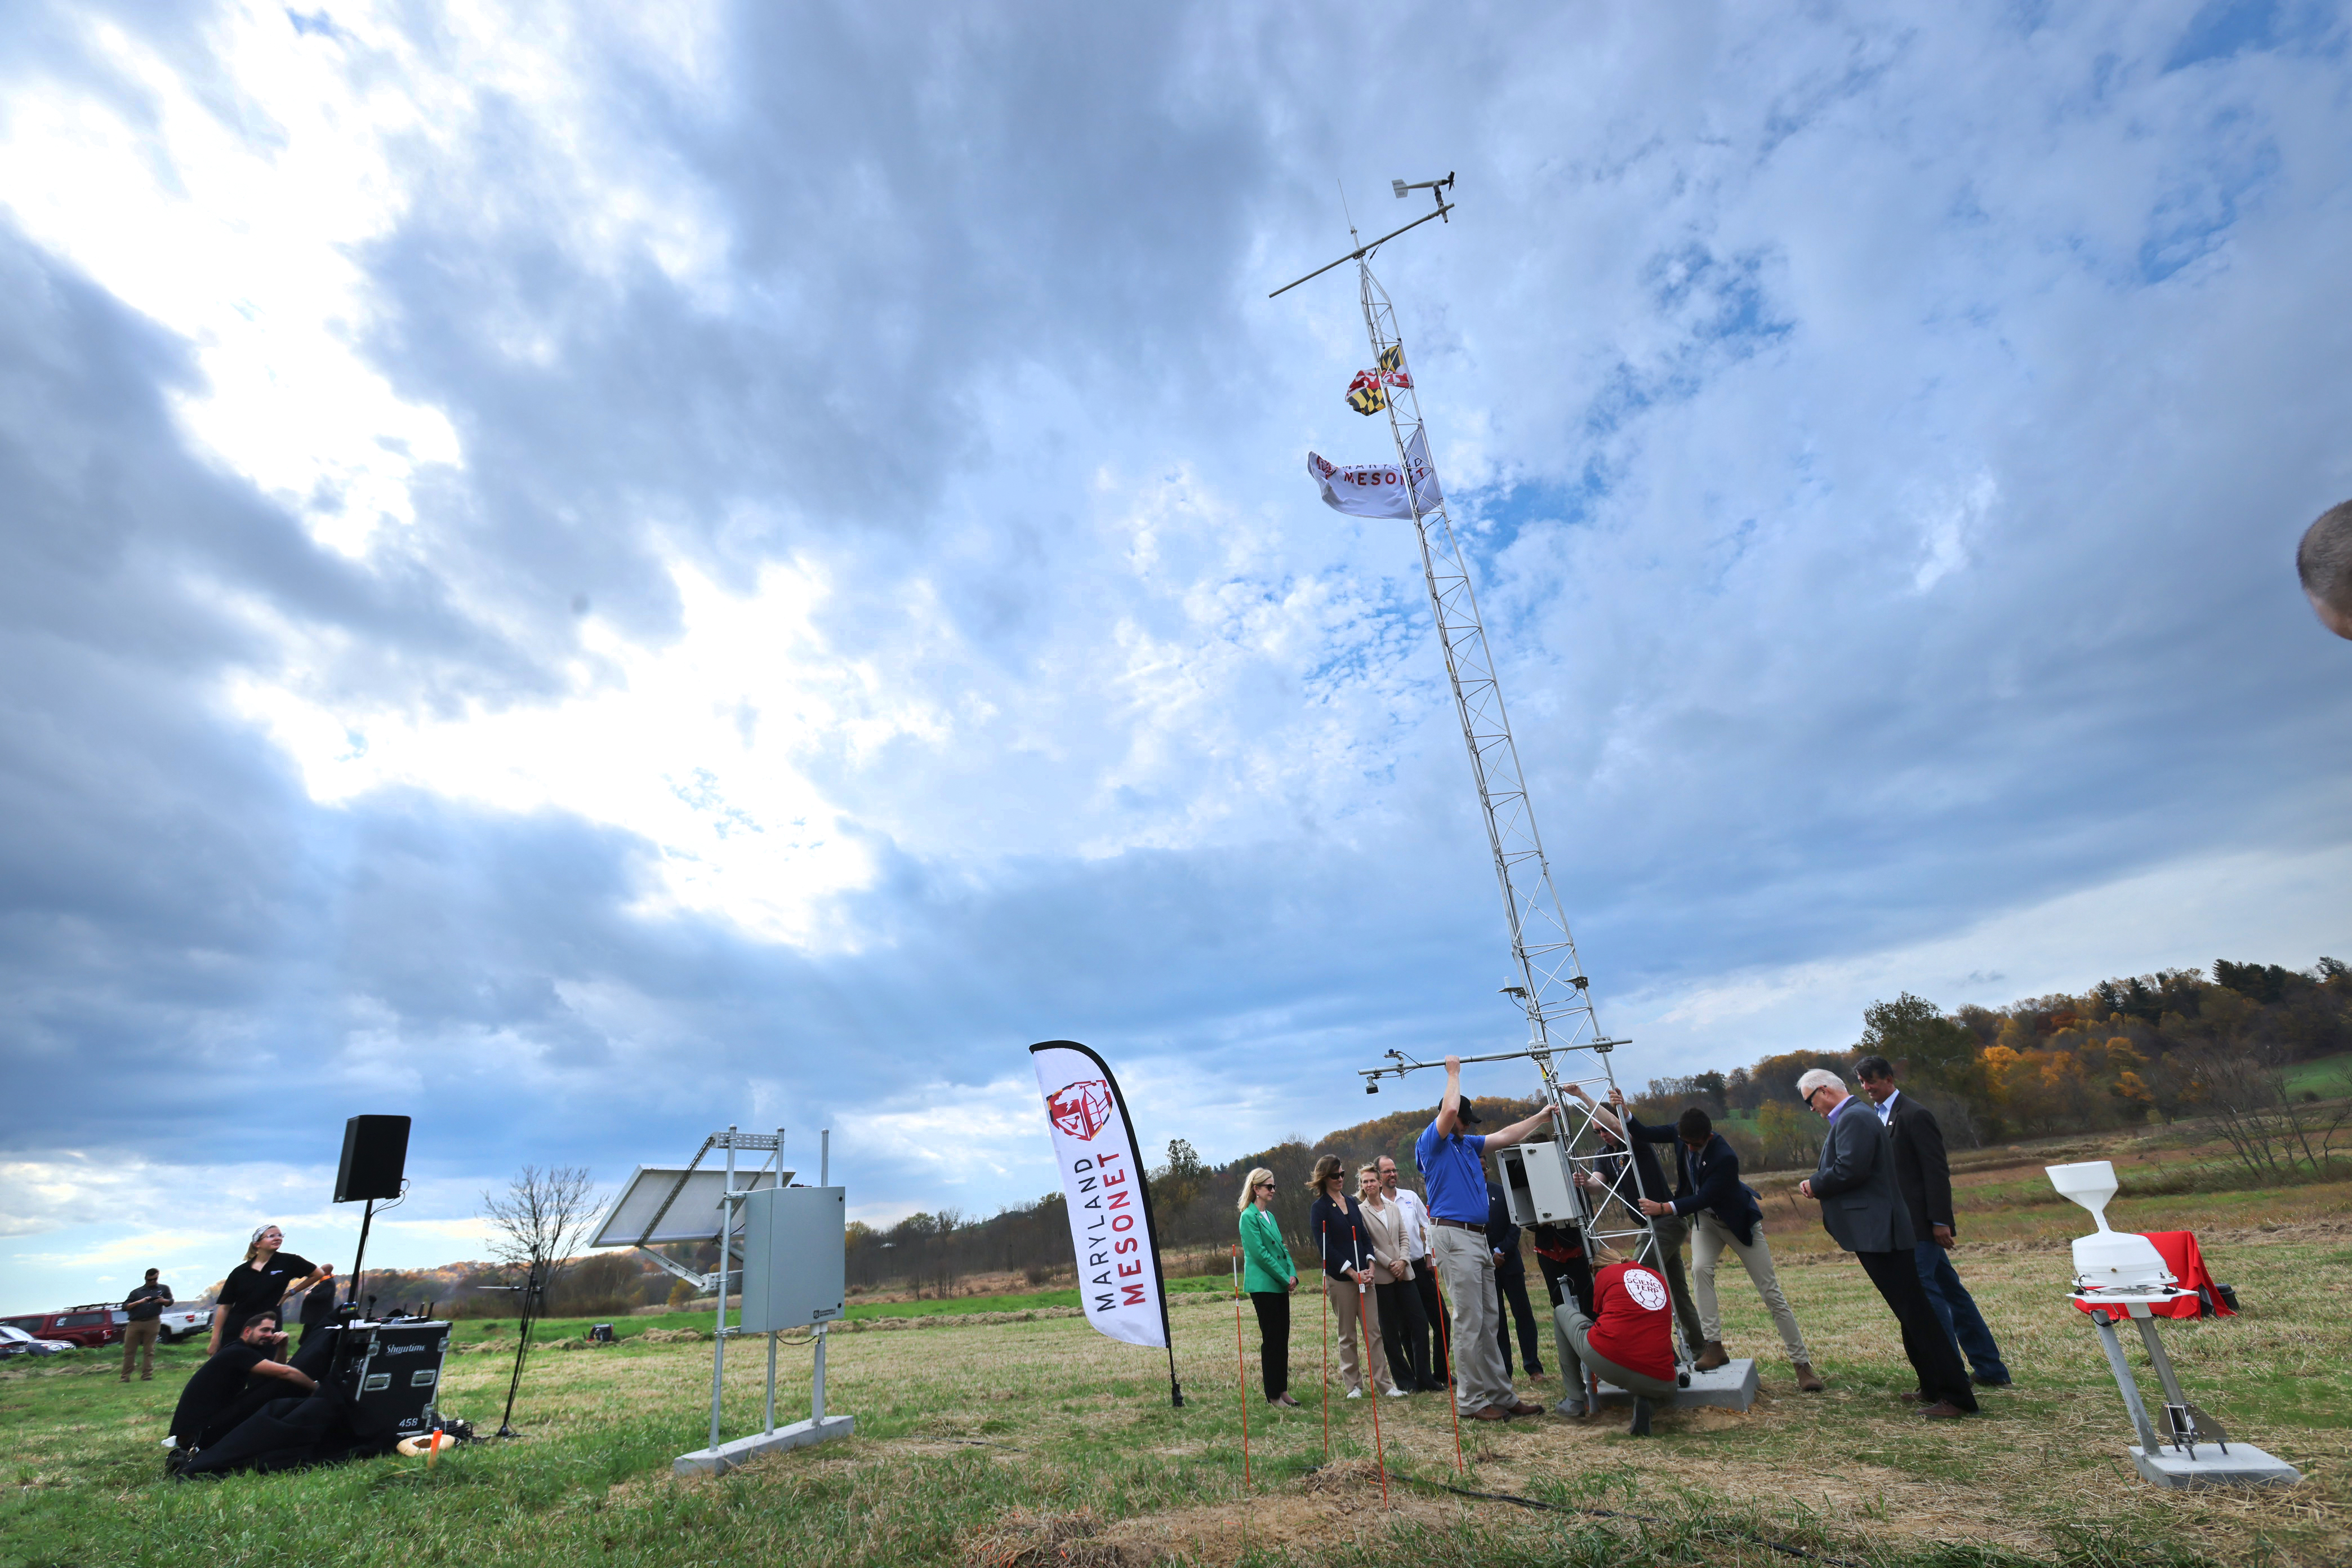 A team of researchers and graduate students set up the first tower of the Maryland Mesonet network.